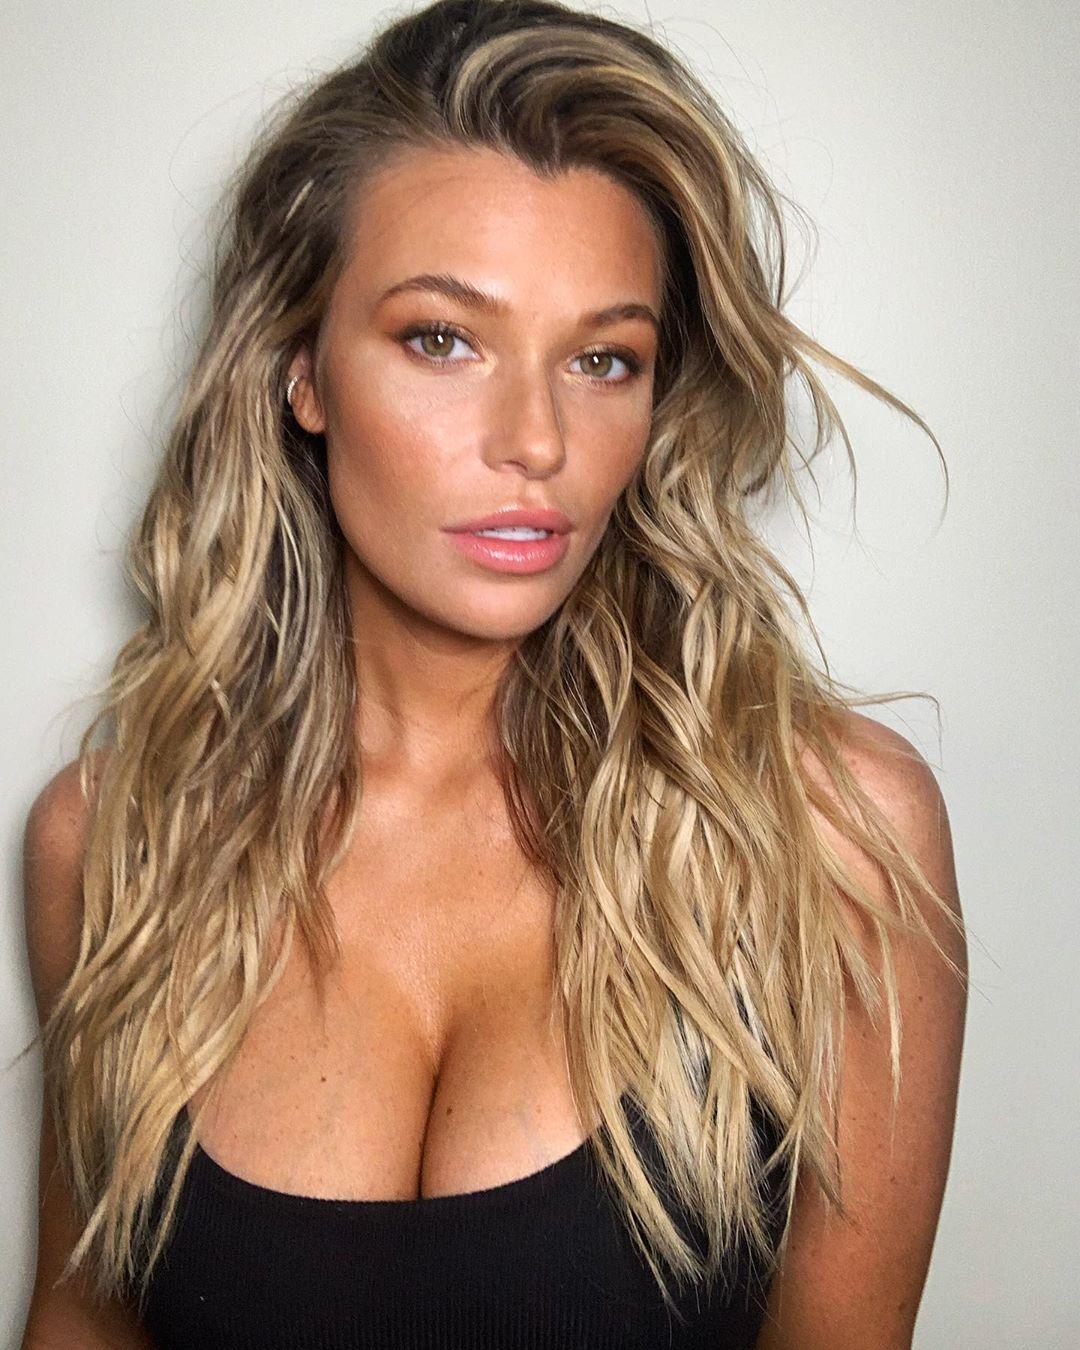 70+ Hot Pictures Of Samantha Hoopes Are Here To Take Your Breath Away 15